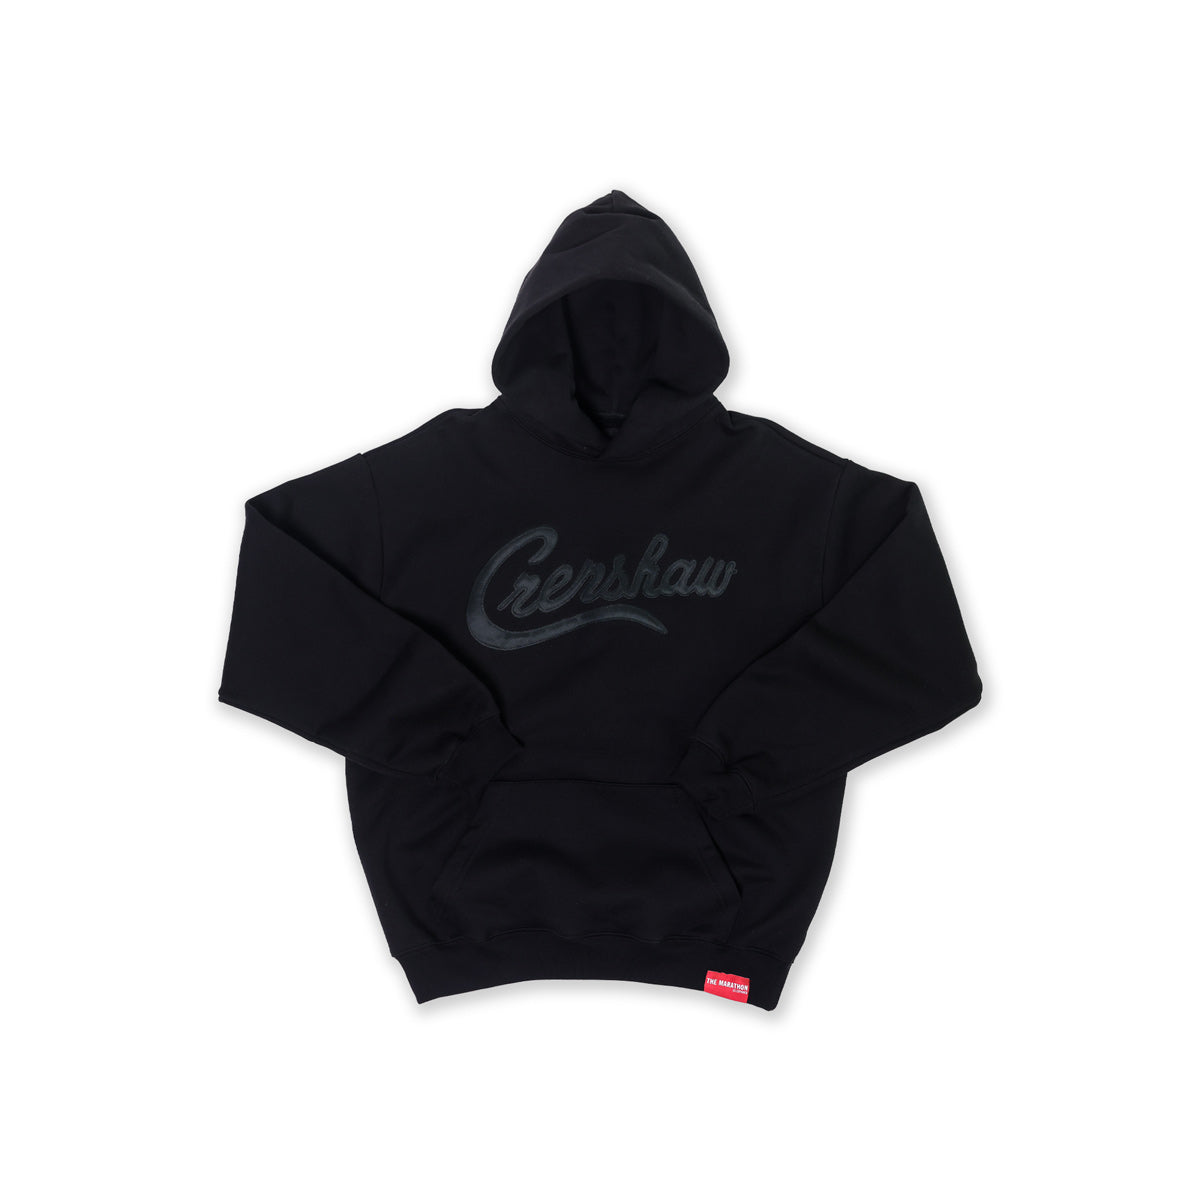 Limited Edition Ultra Crenshaw Hoodie - Black/Black - Front